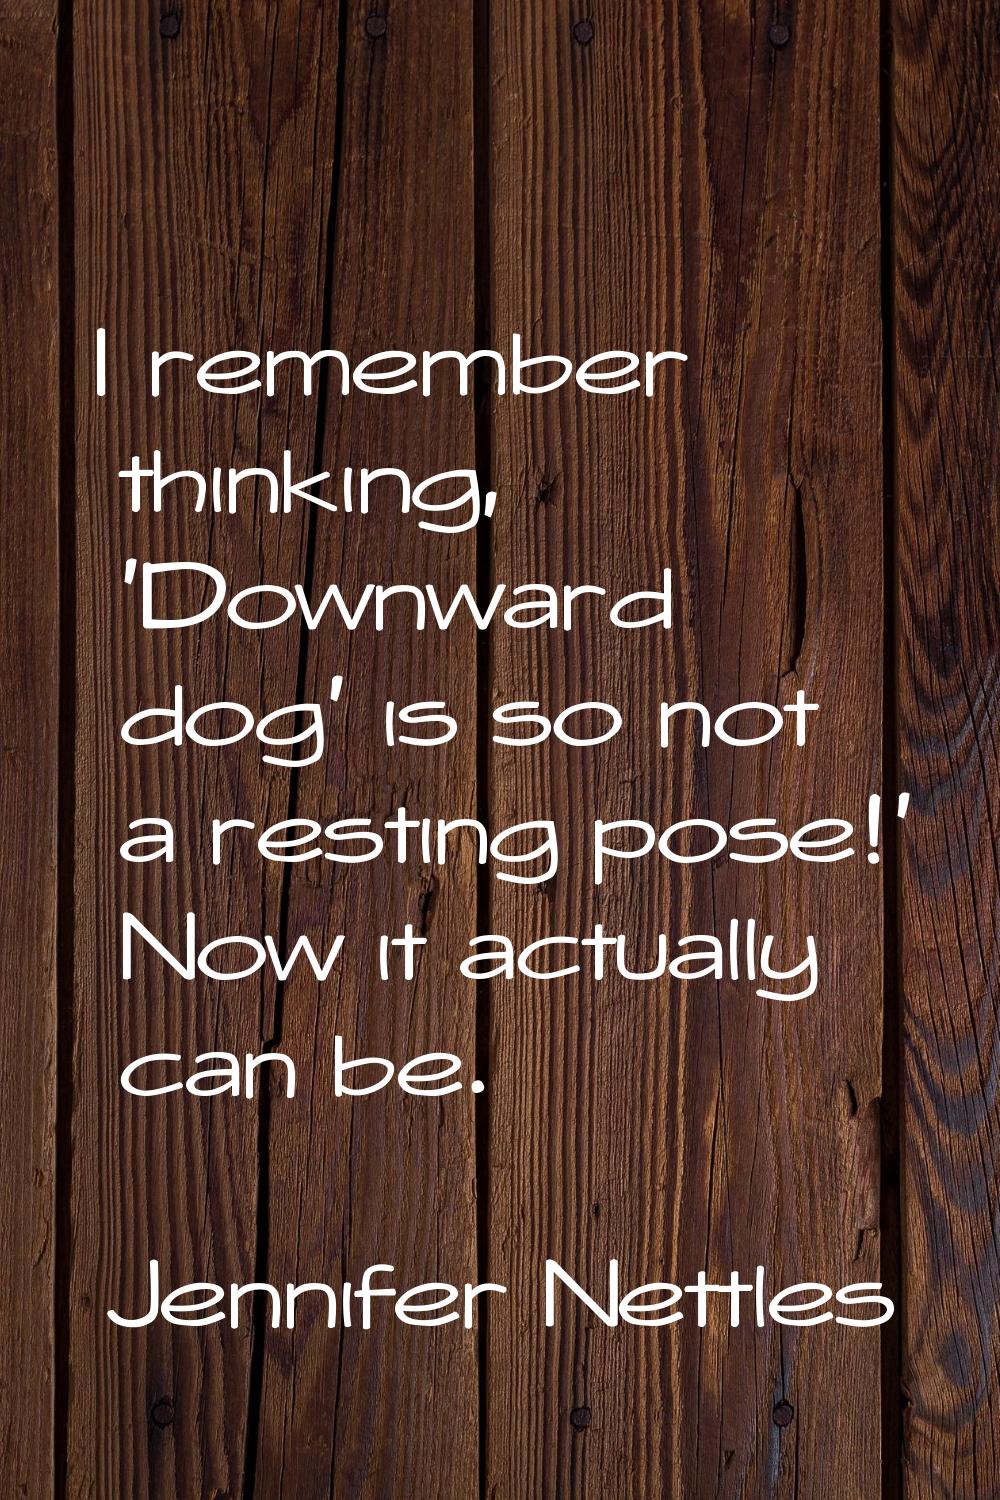 I remember thinking, 'Downward dog' is so not a resting pose!' Now it actually can be.